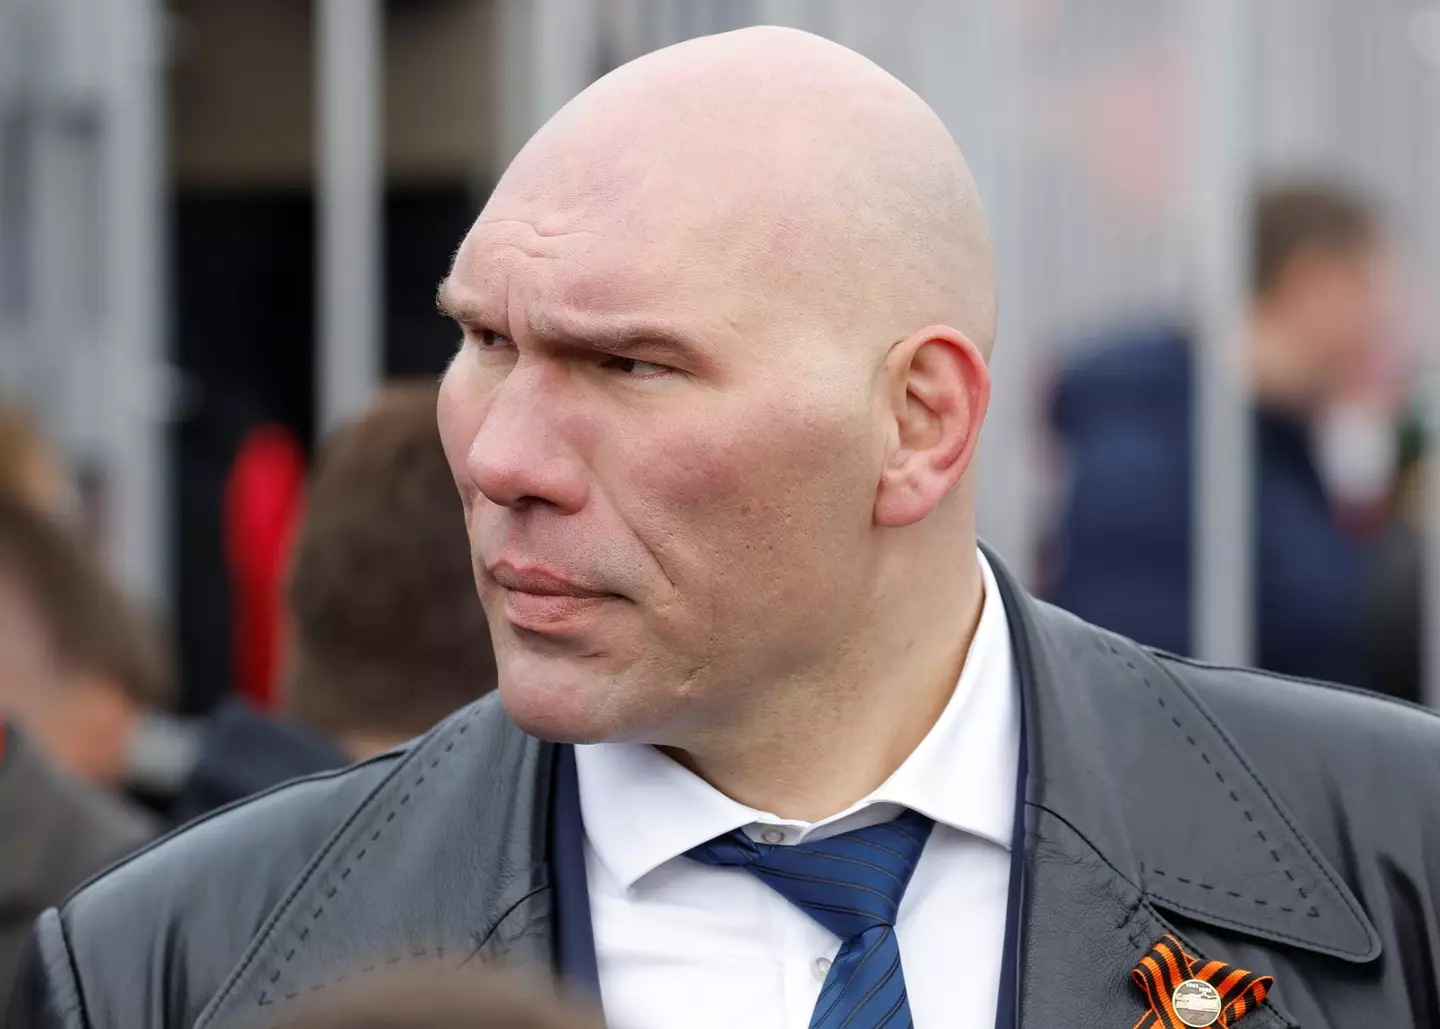 Putin has enlisted the help of Nikolai Valuev, 7-foot-tall boxer, into the army.